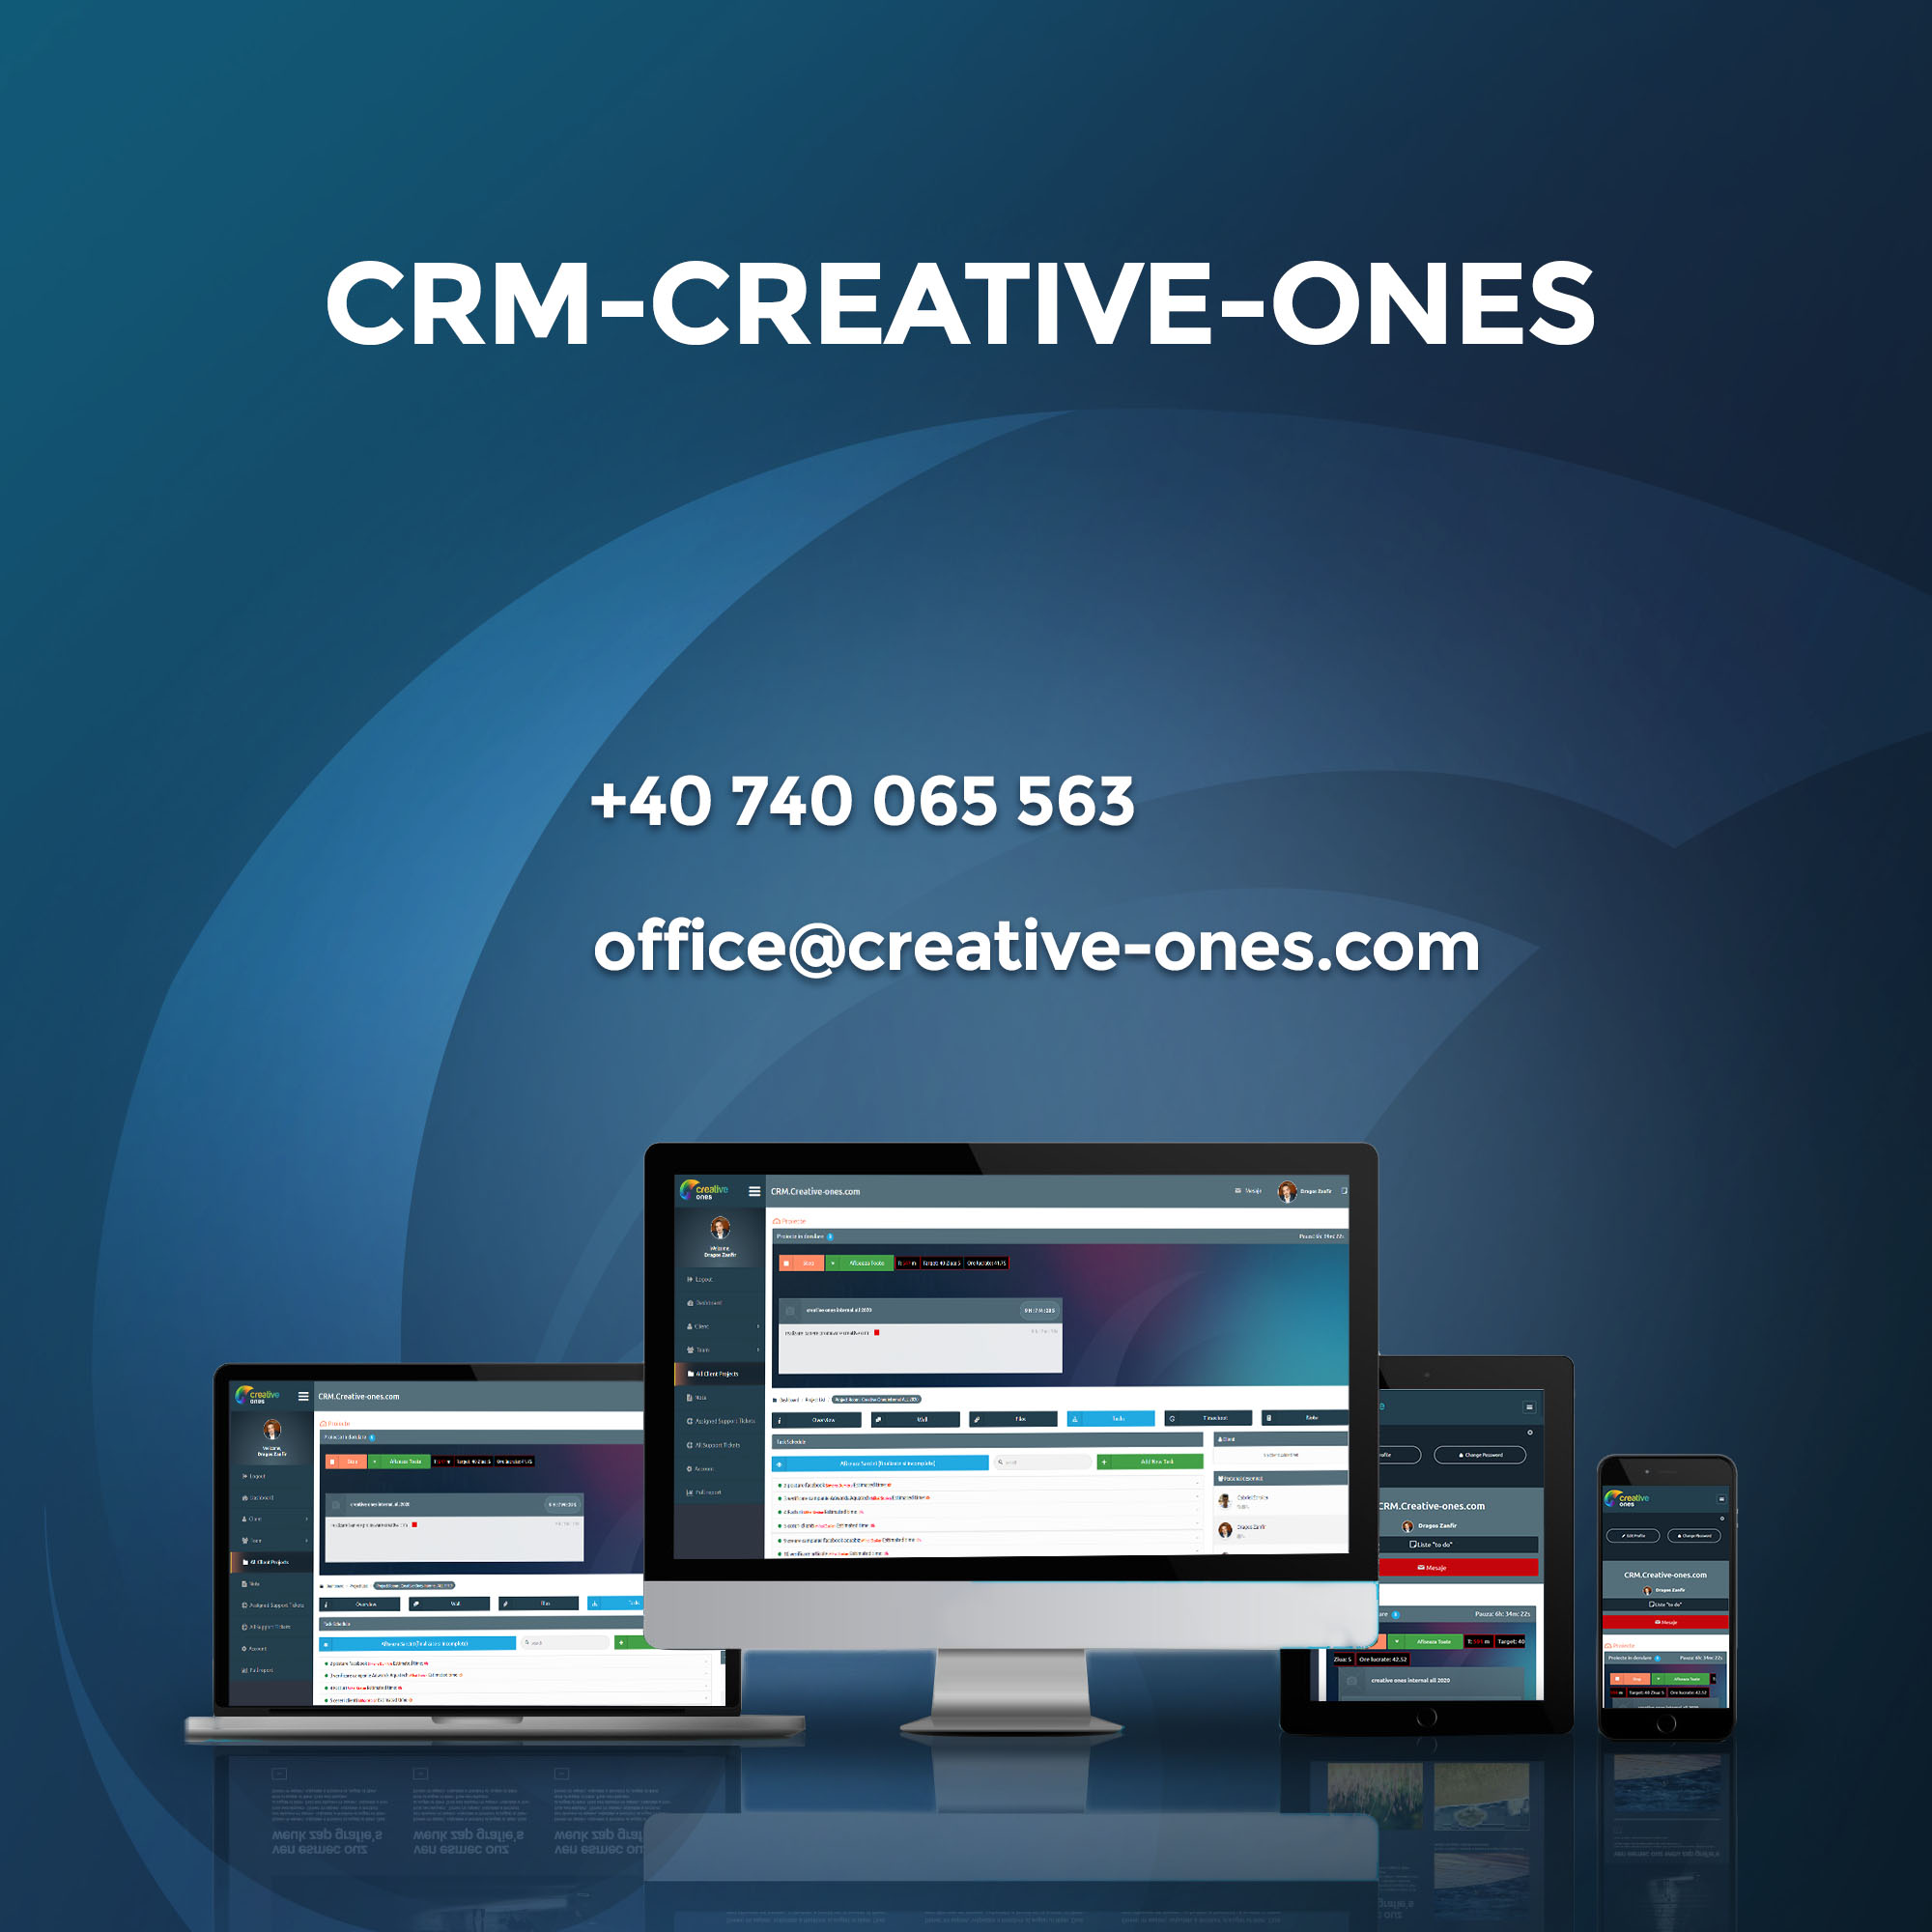 Creative CRM, the application that helps you automate, prioritize and control the flow of your business